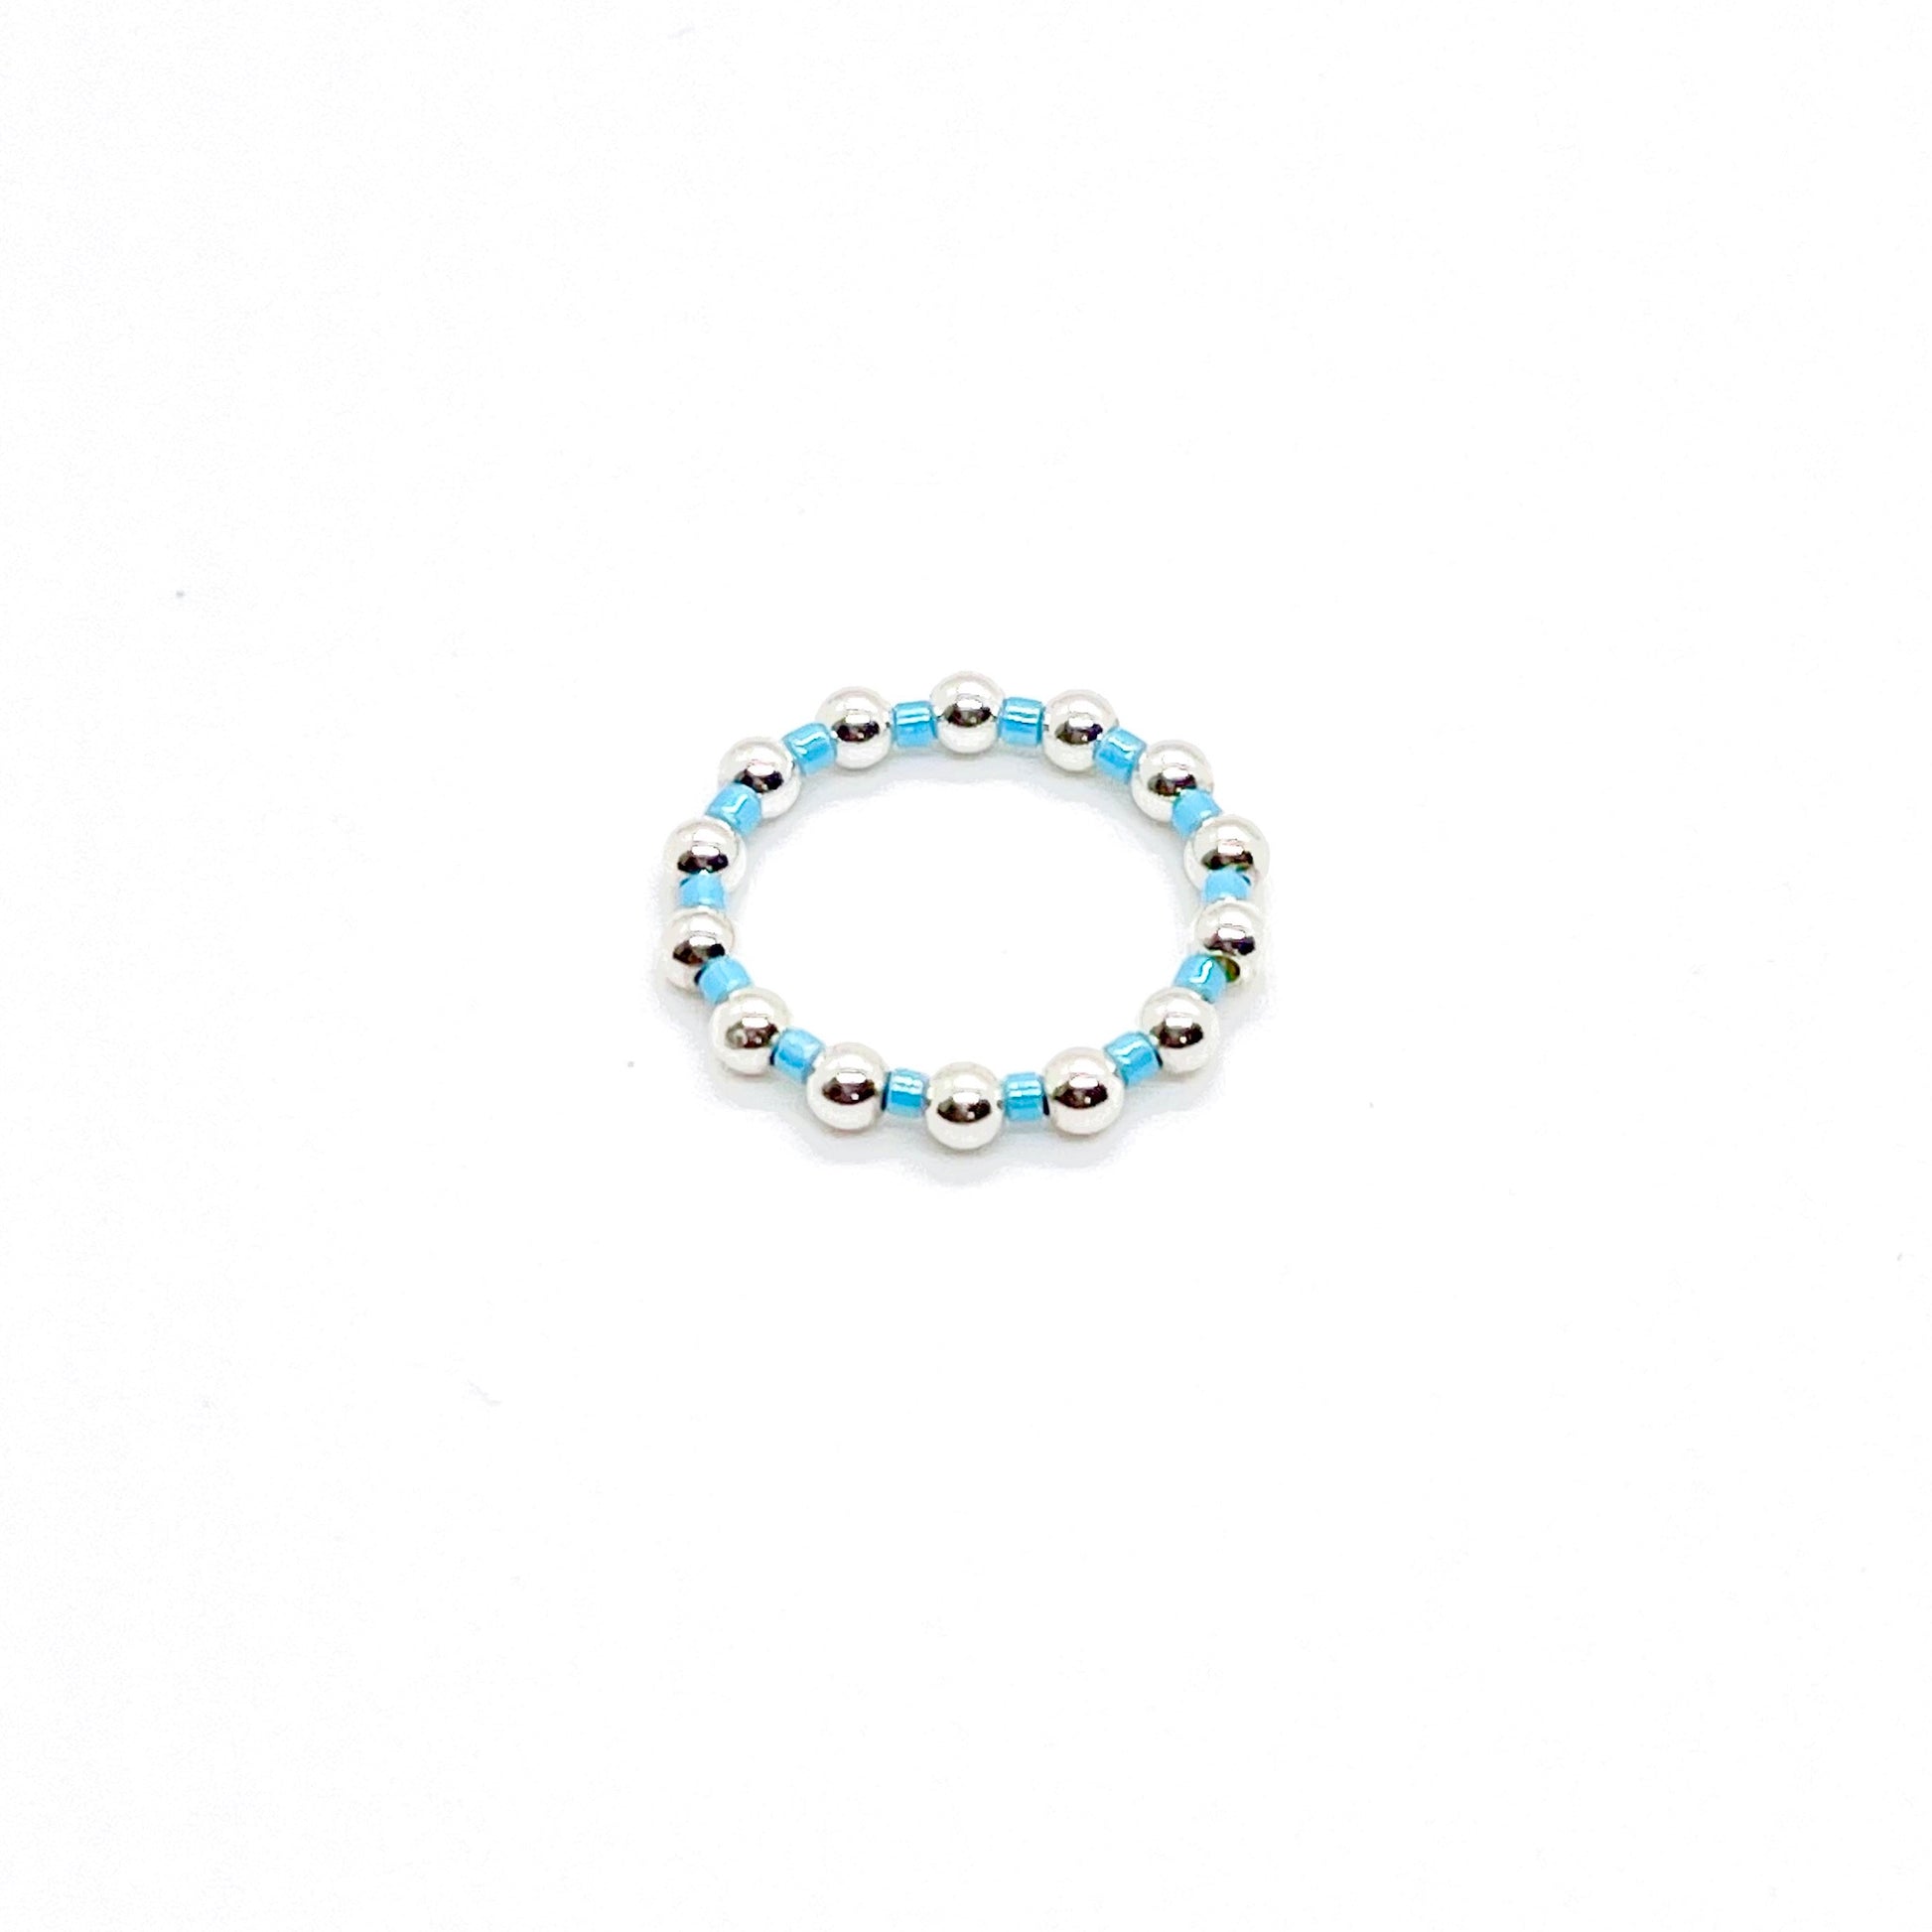 Beaded ring | 3mm sterling silver ball ring with alternating blue seed beads on stretch cord.